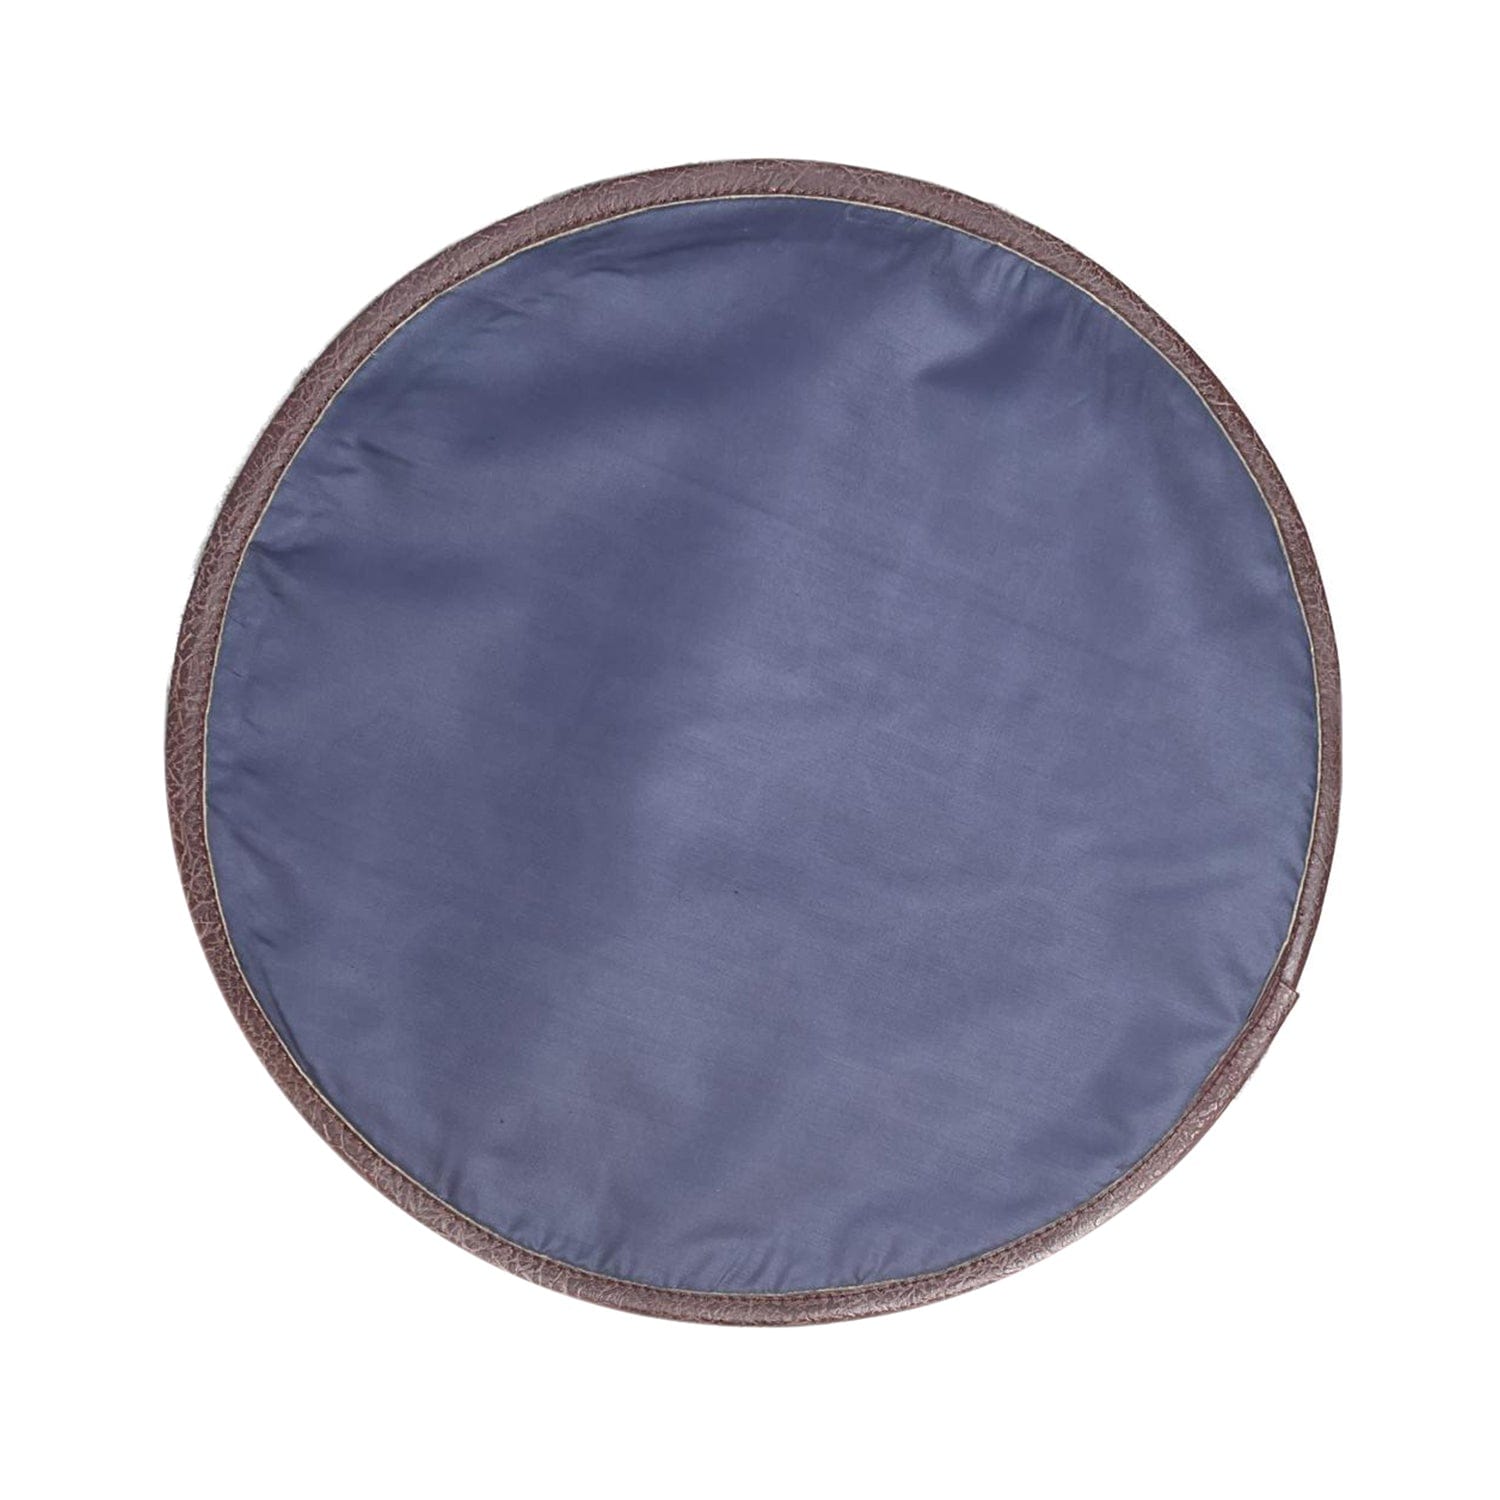 Mona B Set of 2 Printed Mosaic Placemats, 13 INCH Round, Best for Bed-Side Table/Center Table, Dining Table/Shelves (Kilm) - Placemat by Mona-B - Backpack, Flat30, New Arrivals, Sale, Shop1999, Shop2999, Shop3999